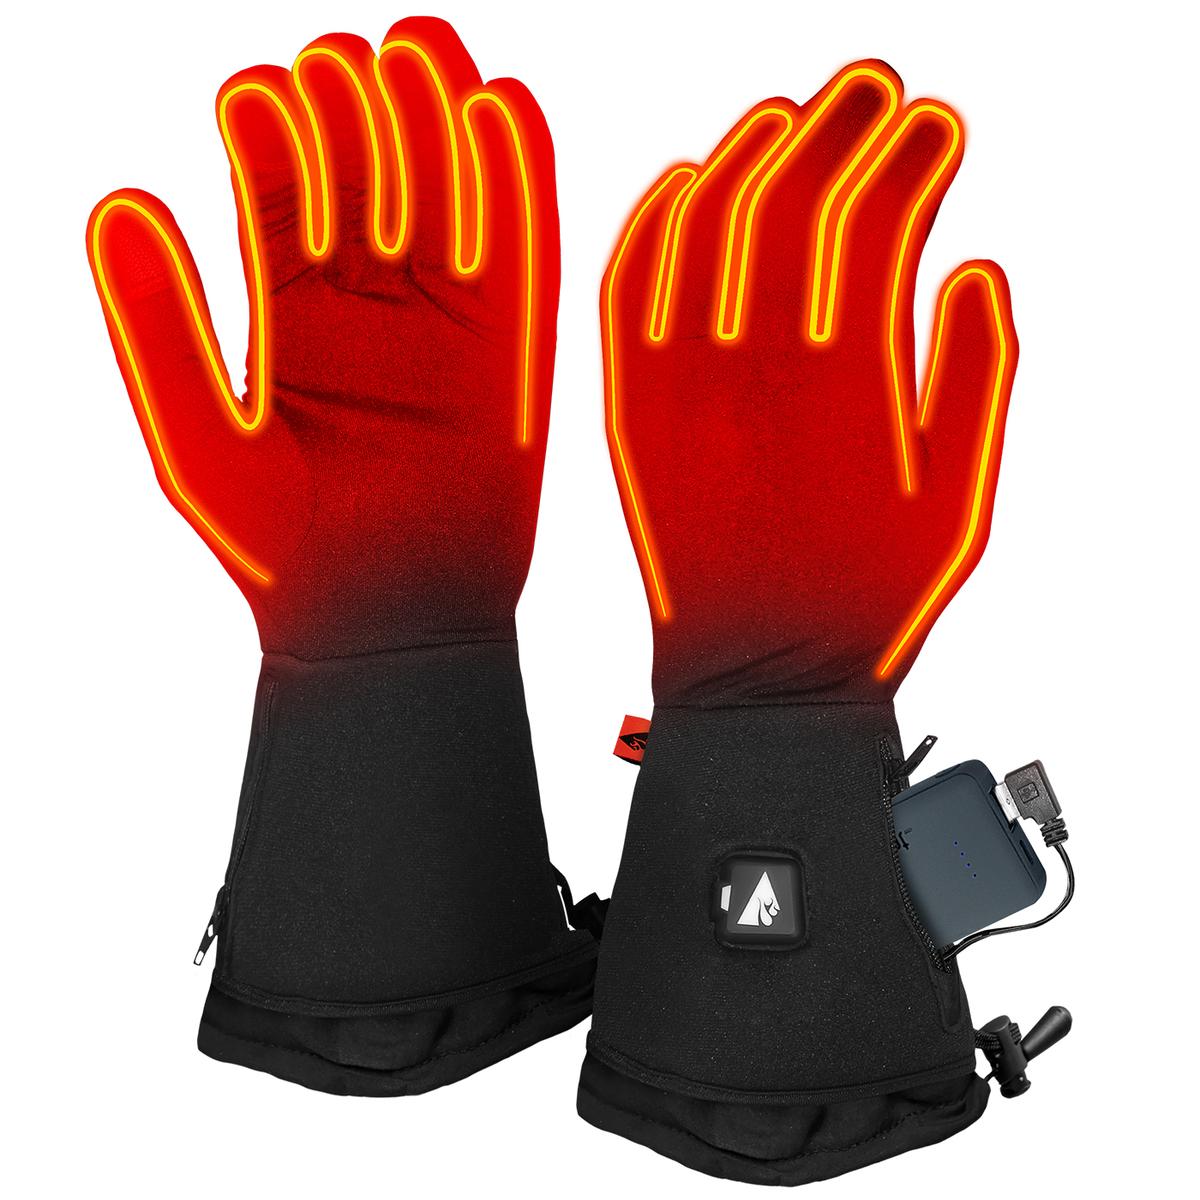 ActionHeat Women's 5V Battery Heated Glove Liners - Black